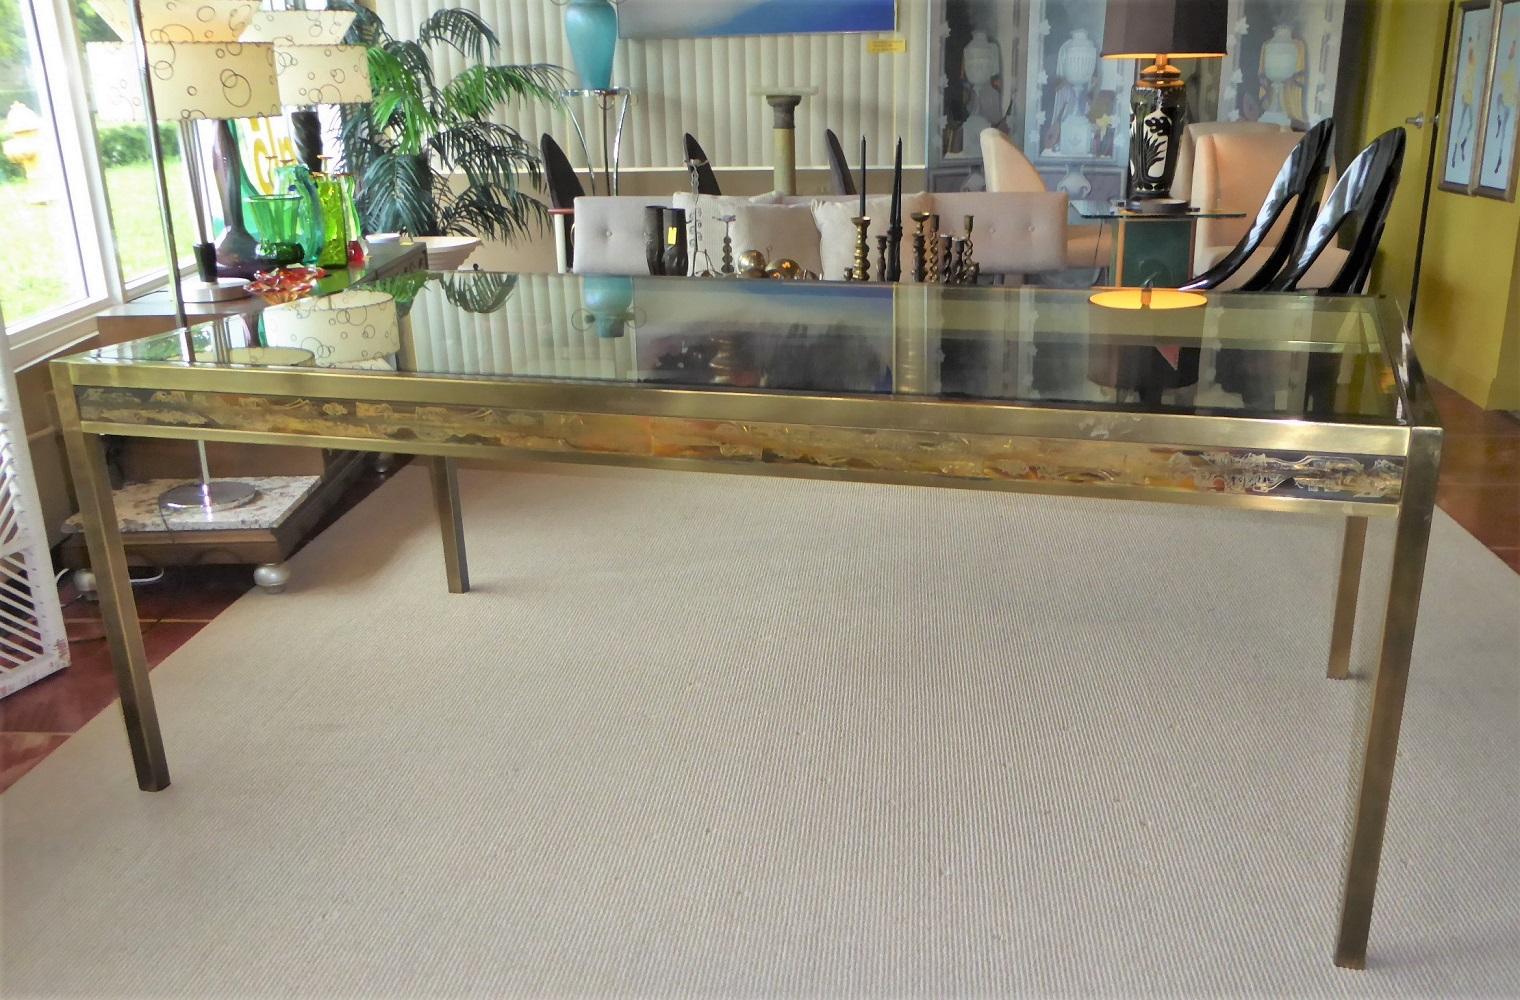 Large Mastercraft brass and glass dining table with panels designed by Bernhard Rohne. Antique brass frame with acid etched decorated panels on its apron and an inset thick beveled glass top. The brass is beautifully patinated although it has some